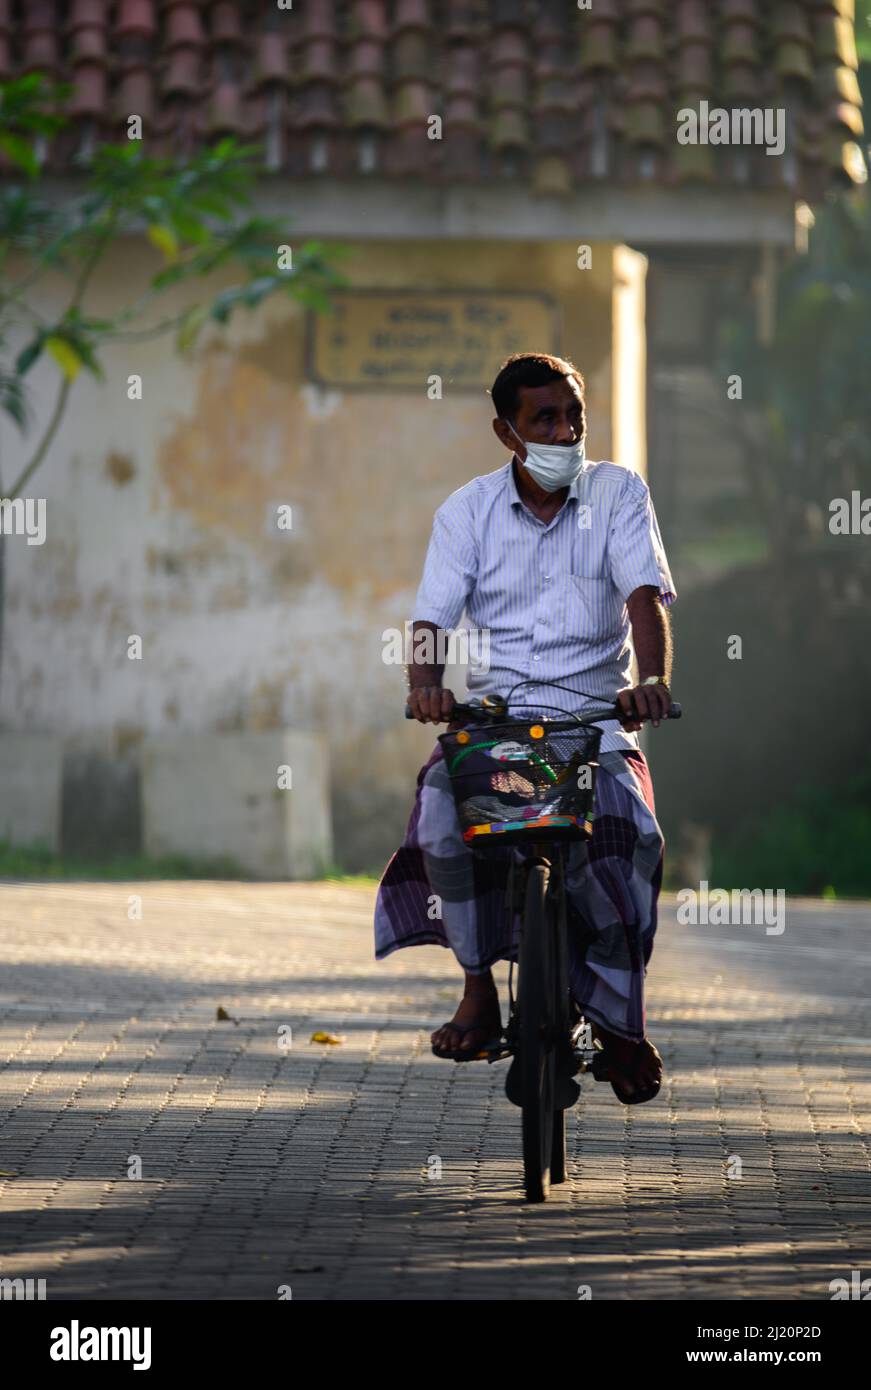 Galle, Sri Lanka - 02 26 2022: Concept of everyday life in Sri Lanka, Elderly ride a bicycle early in the morning, Stock Photo